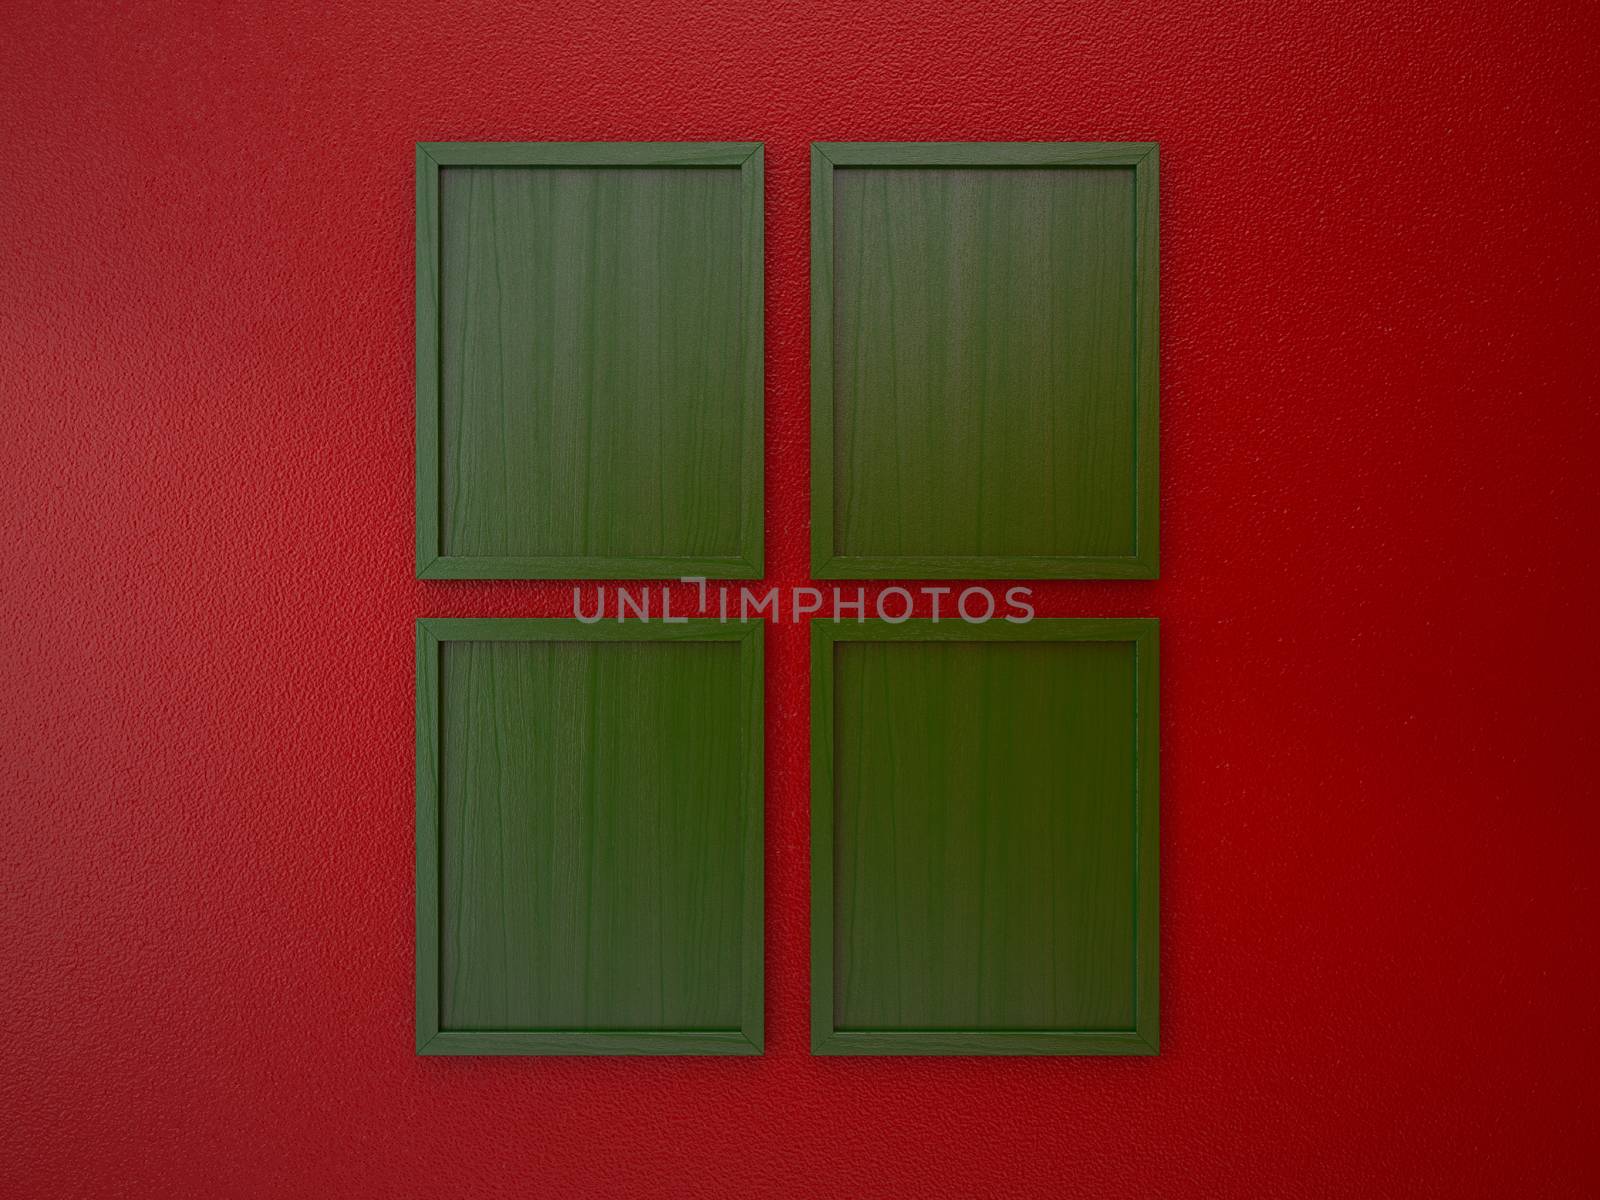 blank frame on interior wall red and green christmas tone color by chingraph